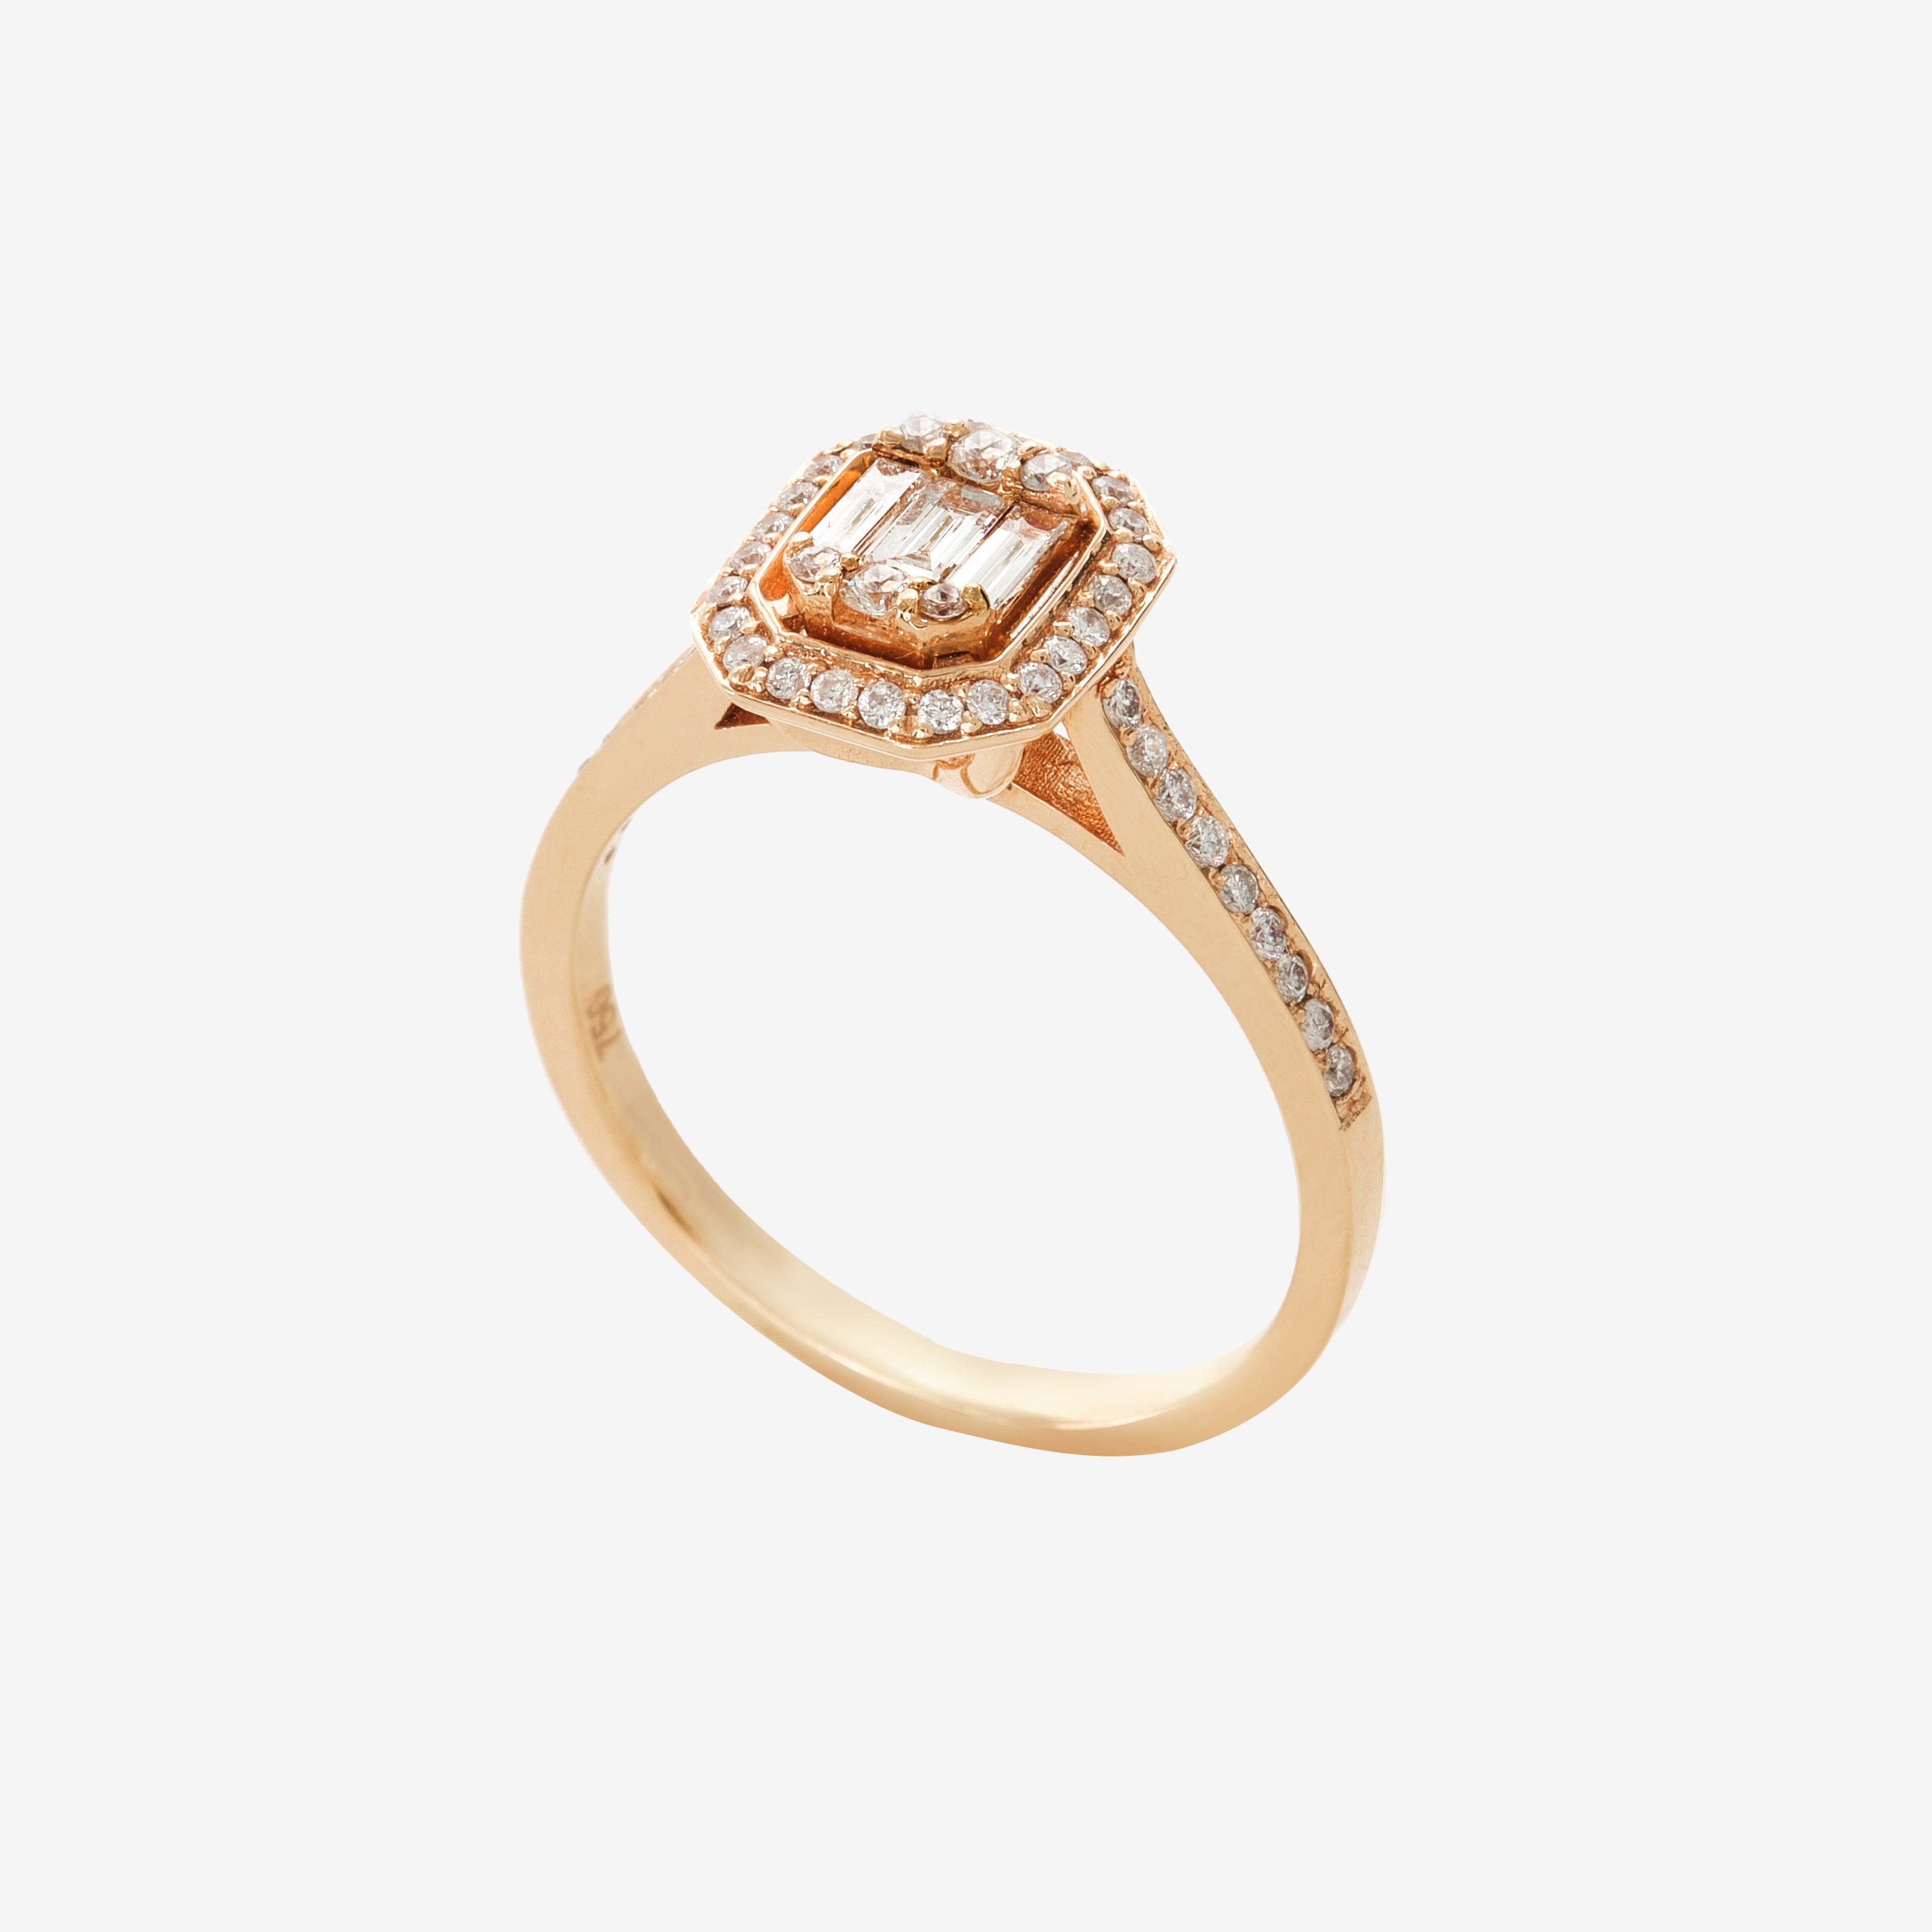 Nile ring with diamonds